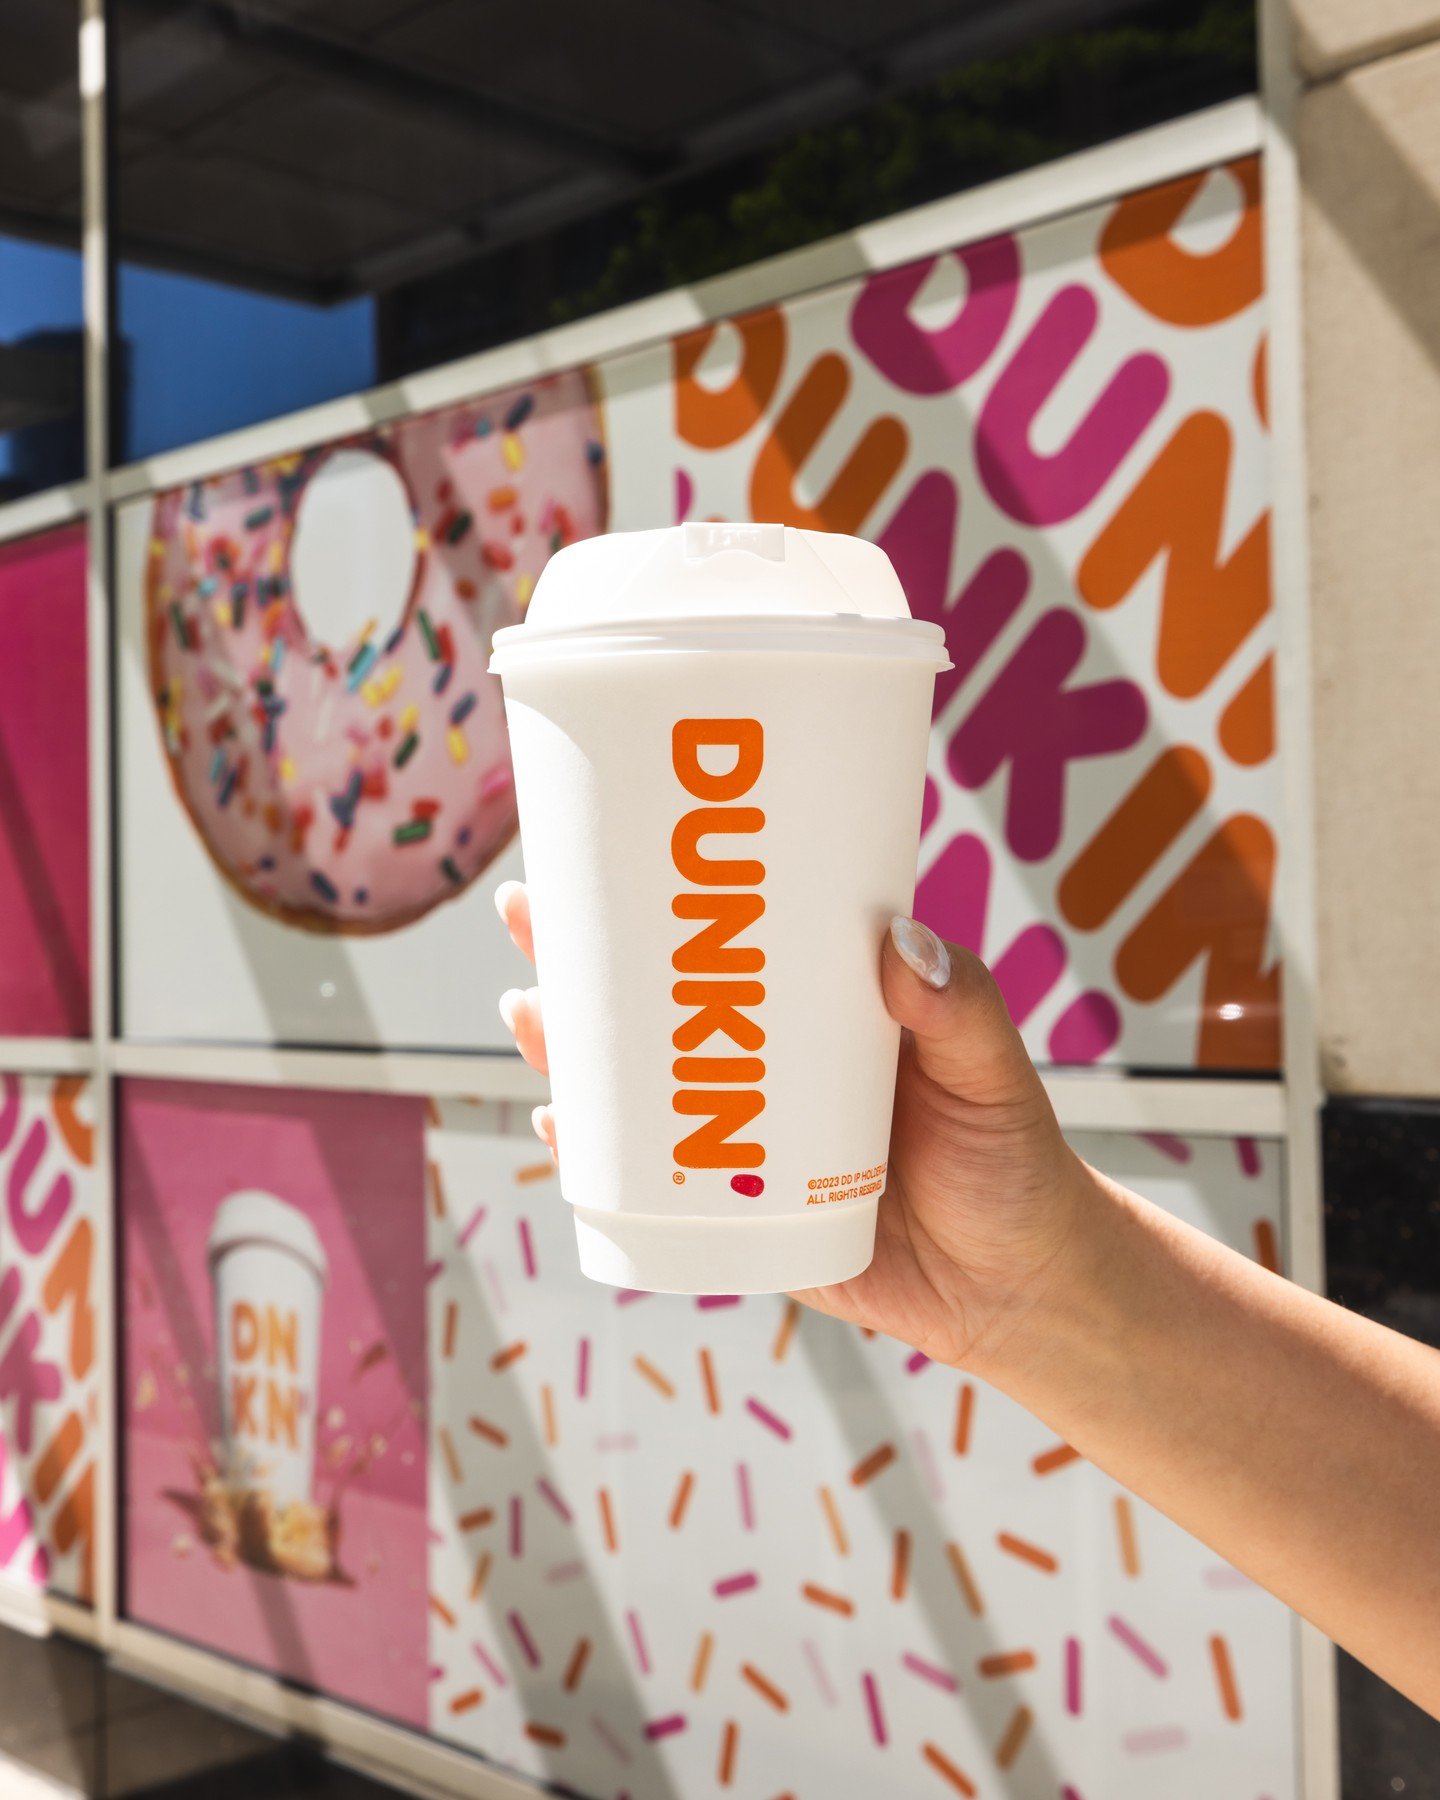 Sip, smile, and repeat! @dunkin awaits you at 1043 Woodward Avenue ☕️

#DunkinDonuts #DowntownDetroit